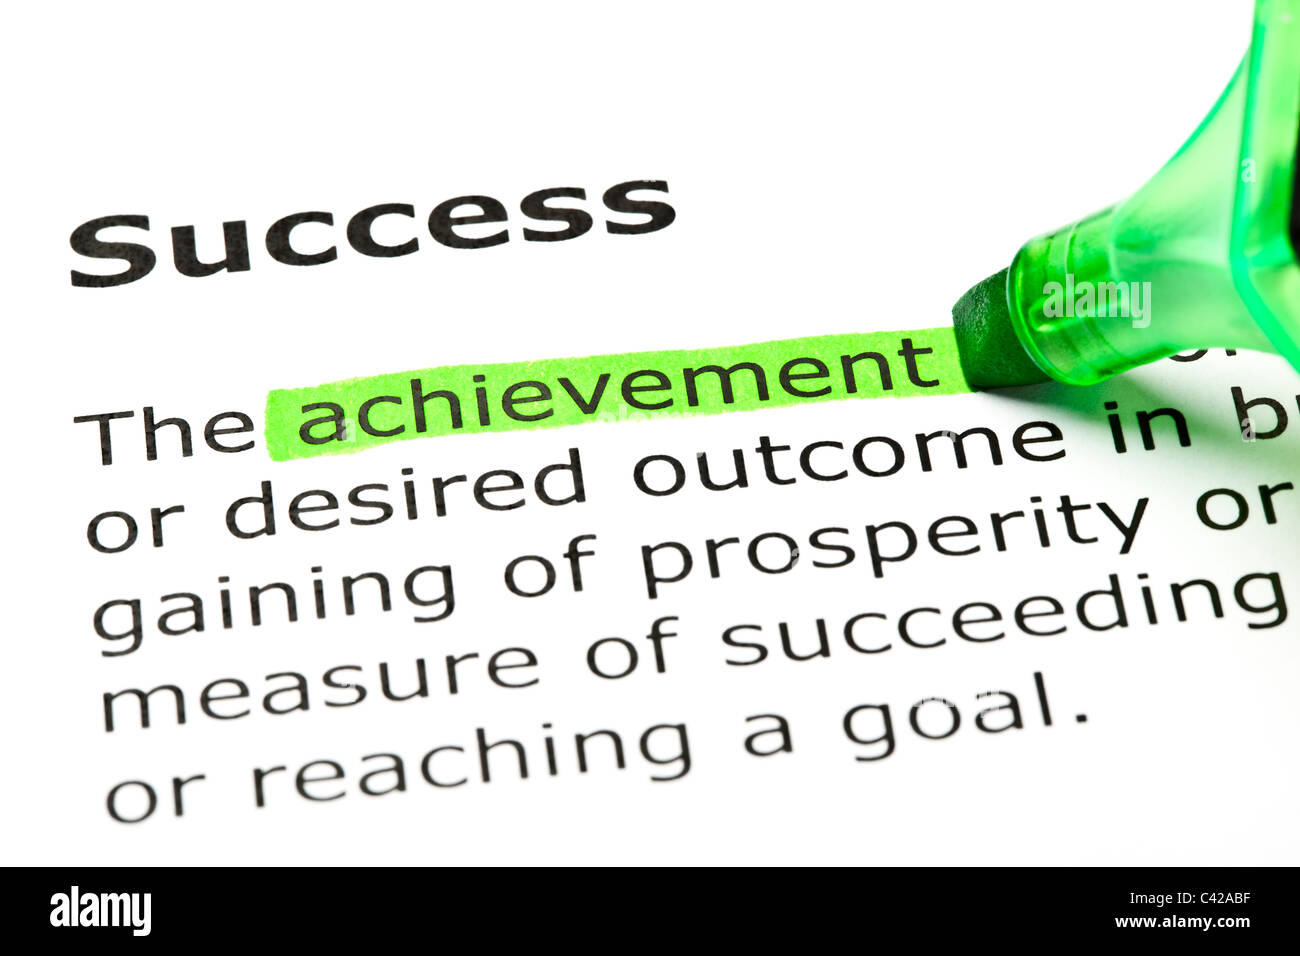 'Achievement' highlighted in green, under the heading 'Success' Stock Photo